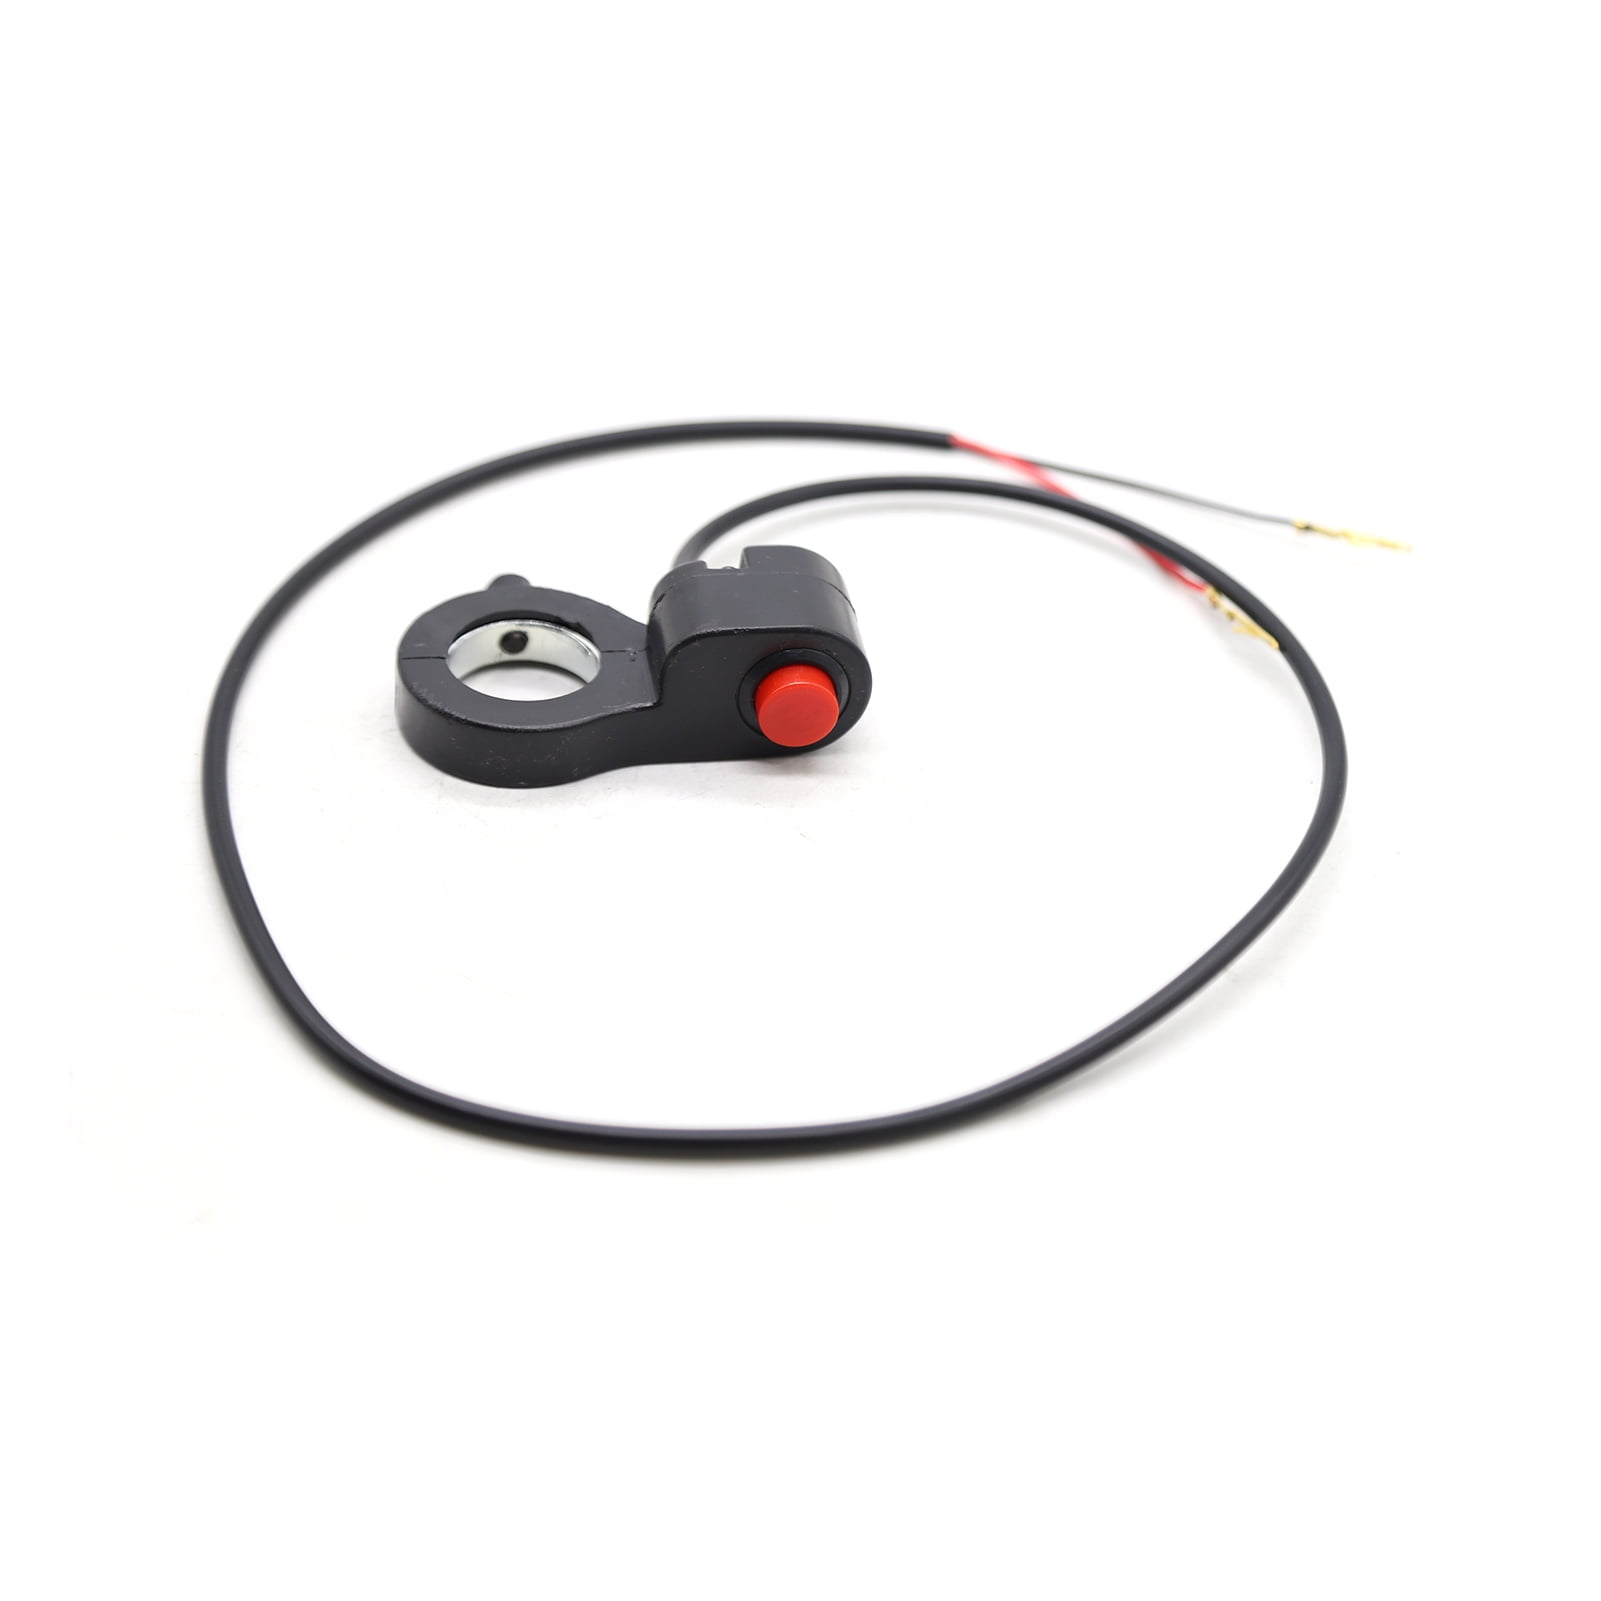 Handle Switch Horn Switch Ignite Button Motorcycle Original